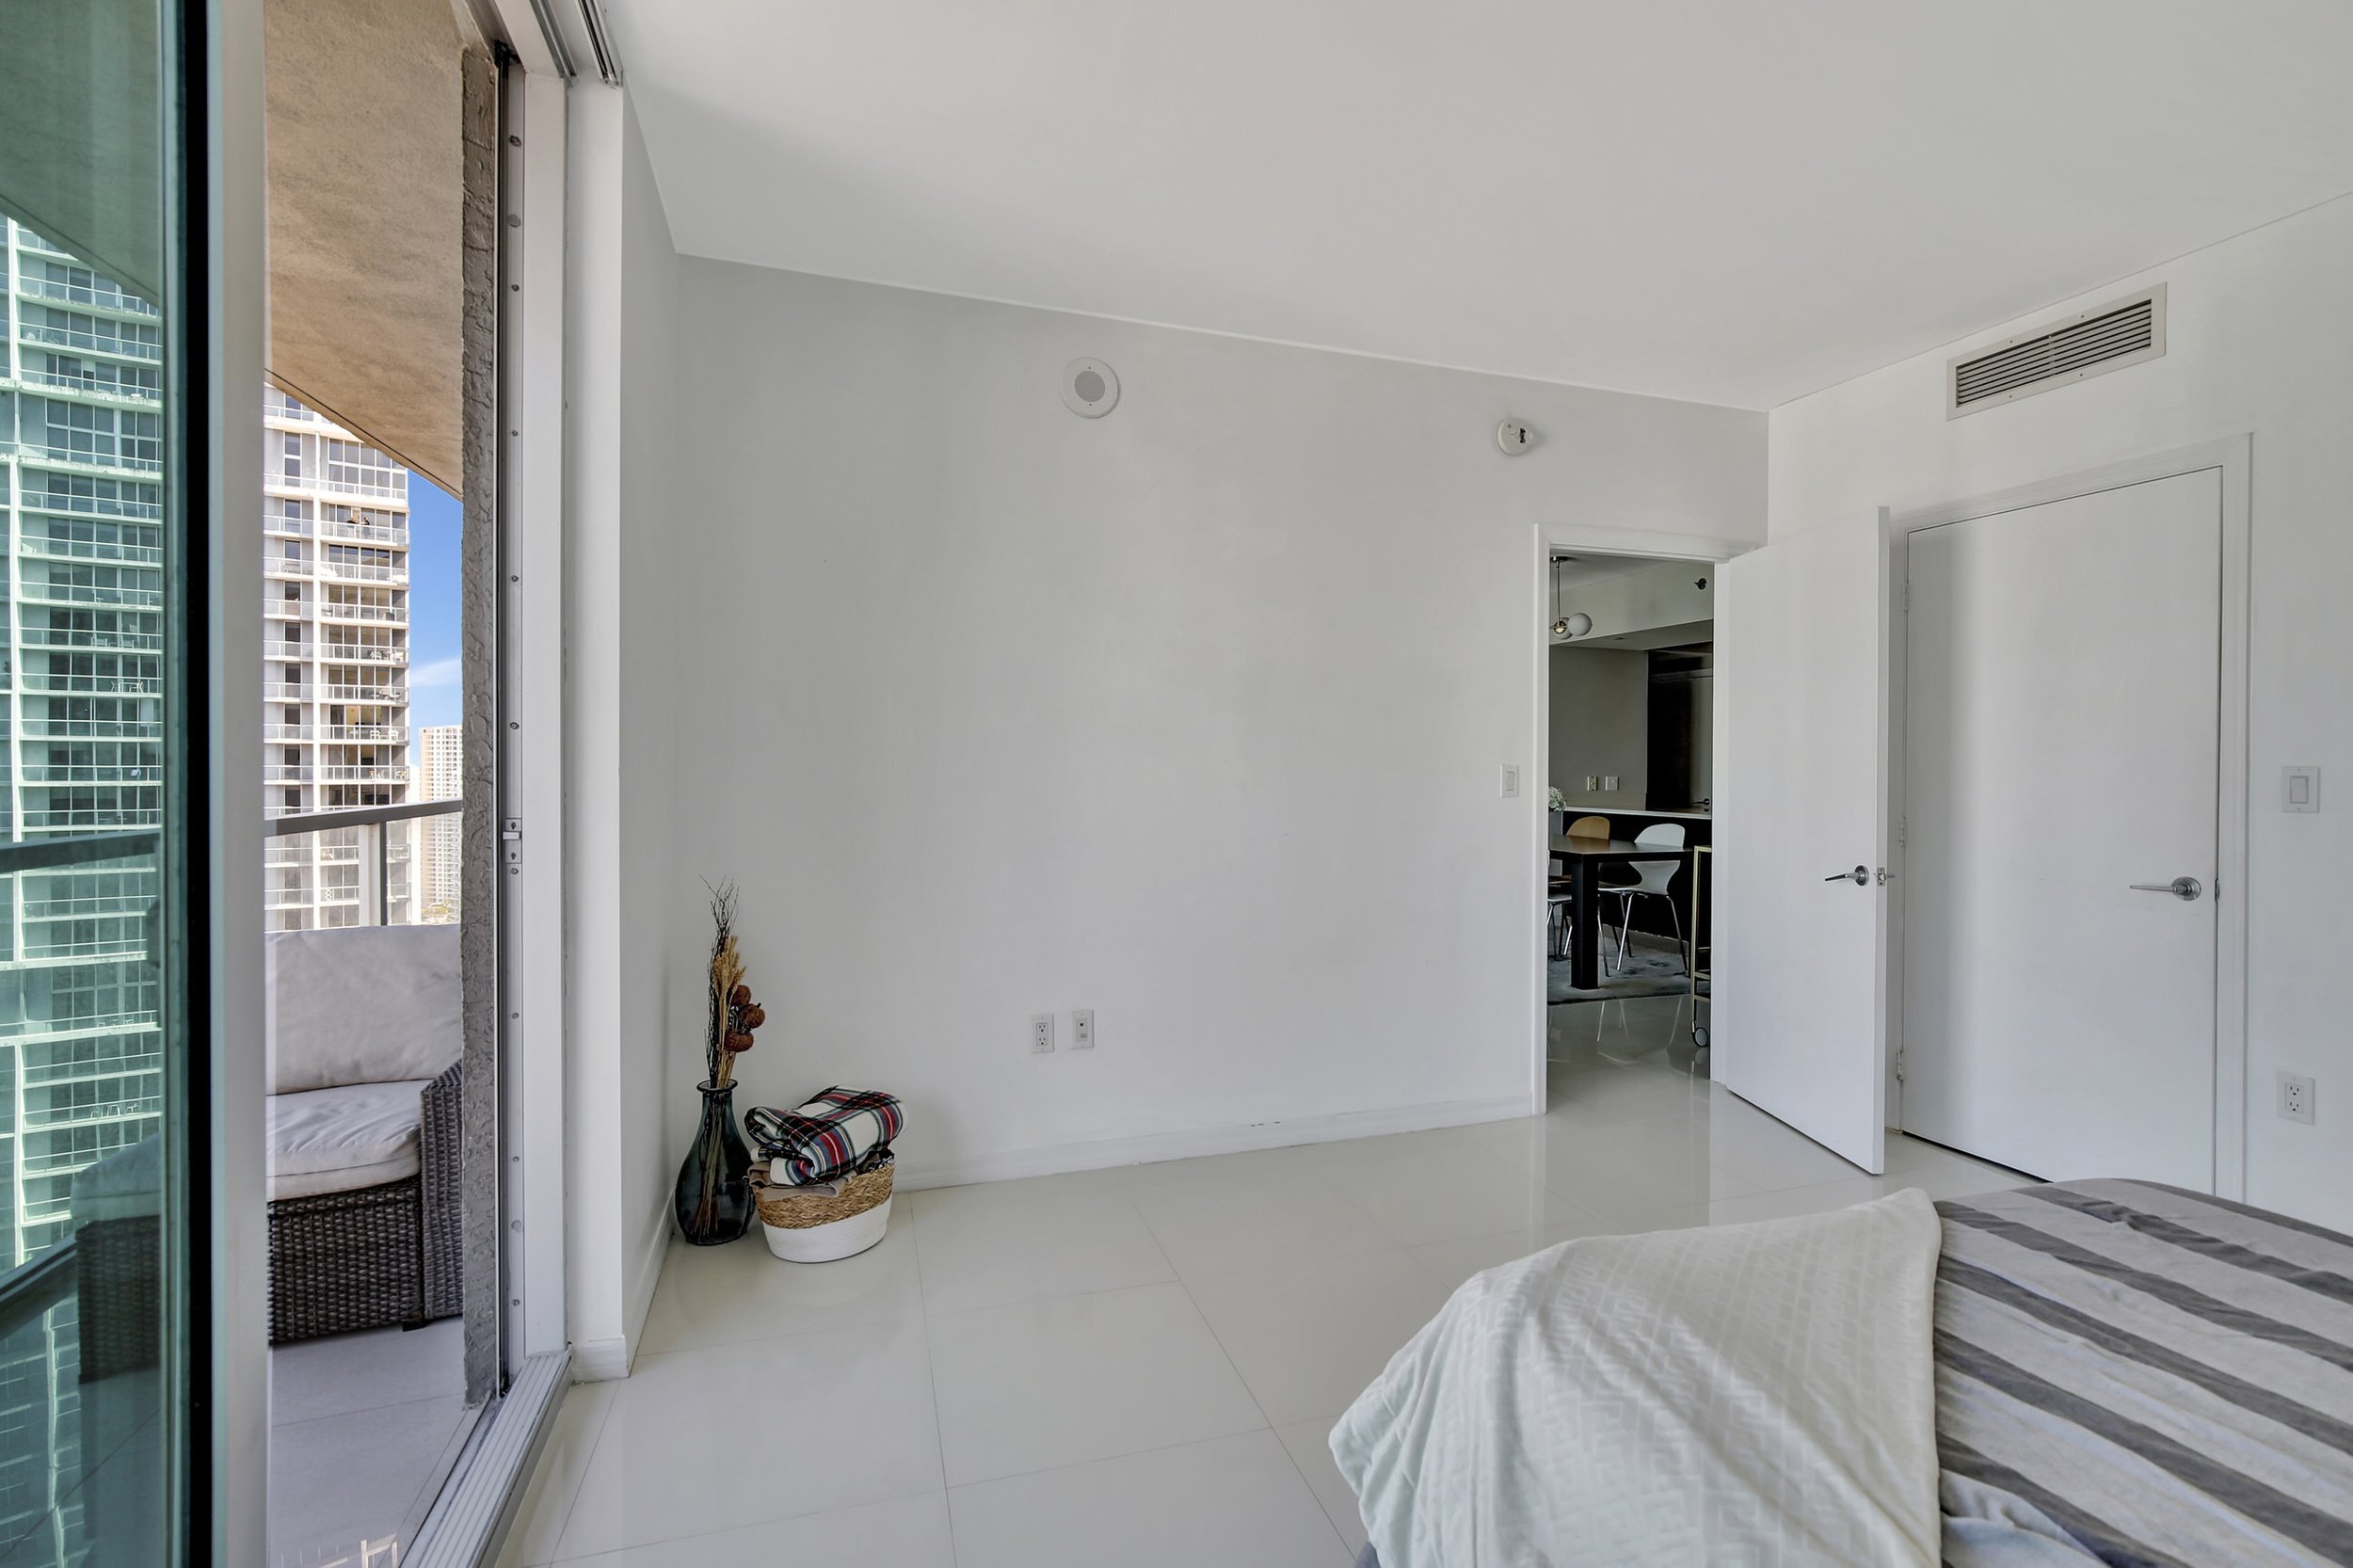 Check Out This Two-Bedroom Condo For Under $900K In Brickell 5.jpg